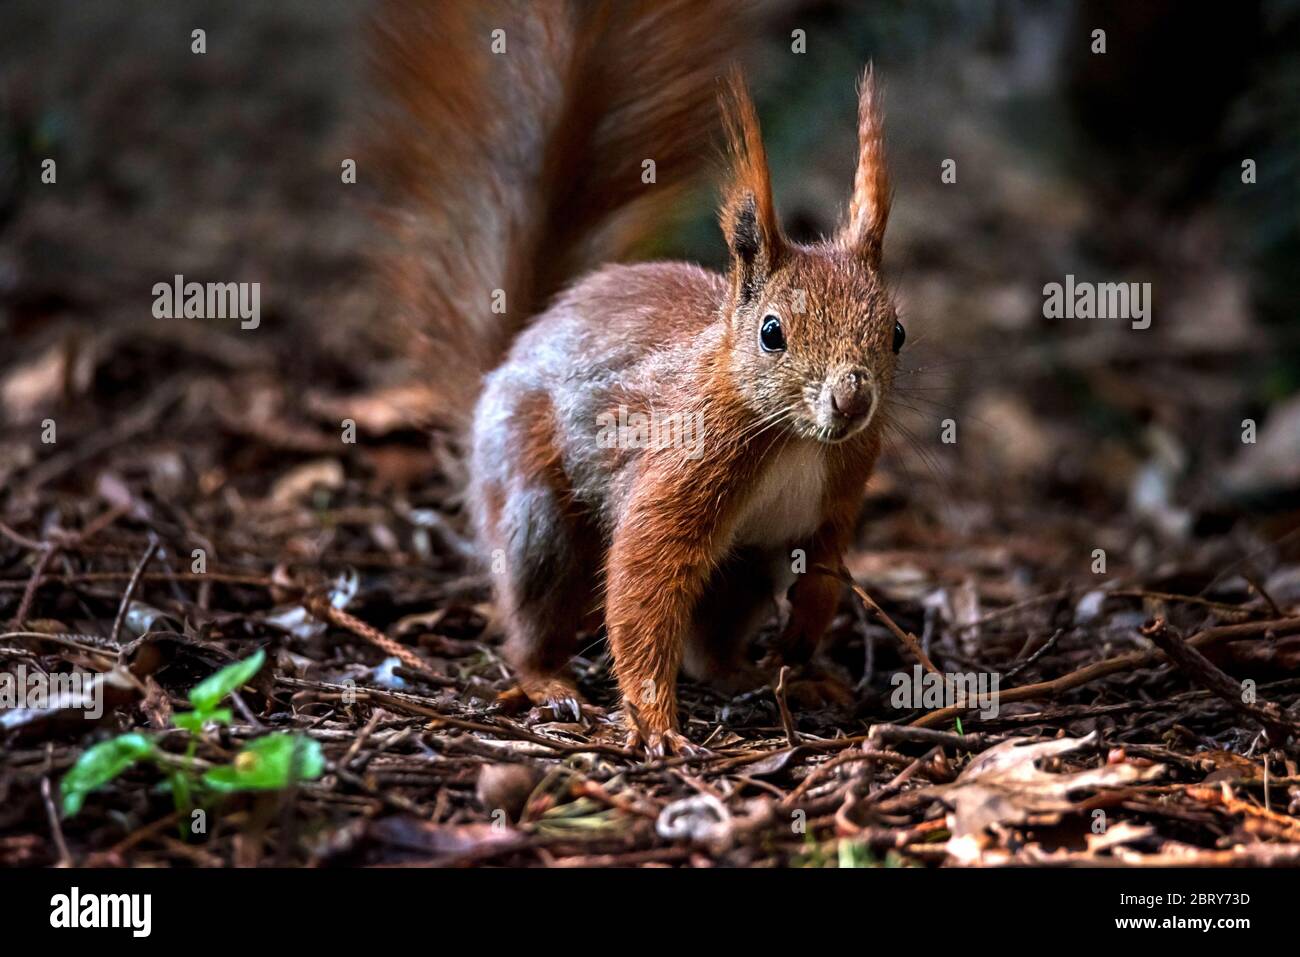 Red squirrel in the forest. A forest animal seen up close. A pet with a red tail and large eyes in the spring forest between the trees. Stock Photo